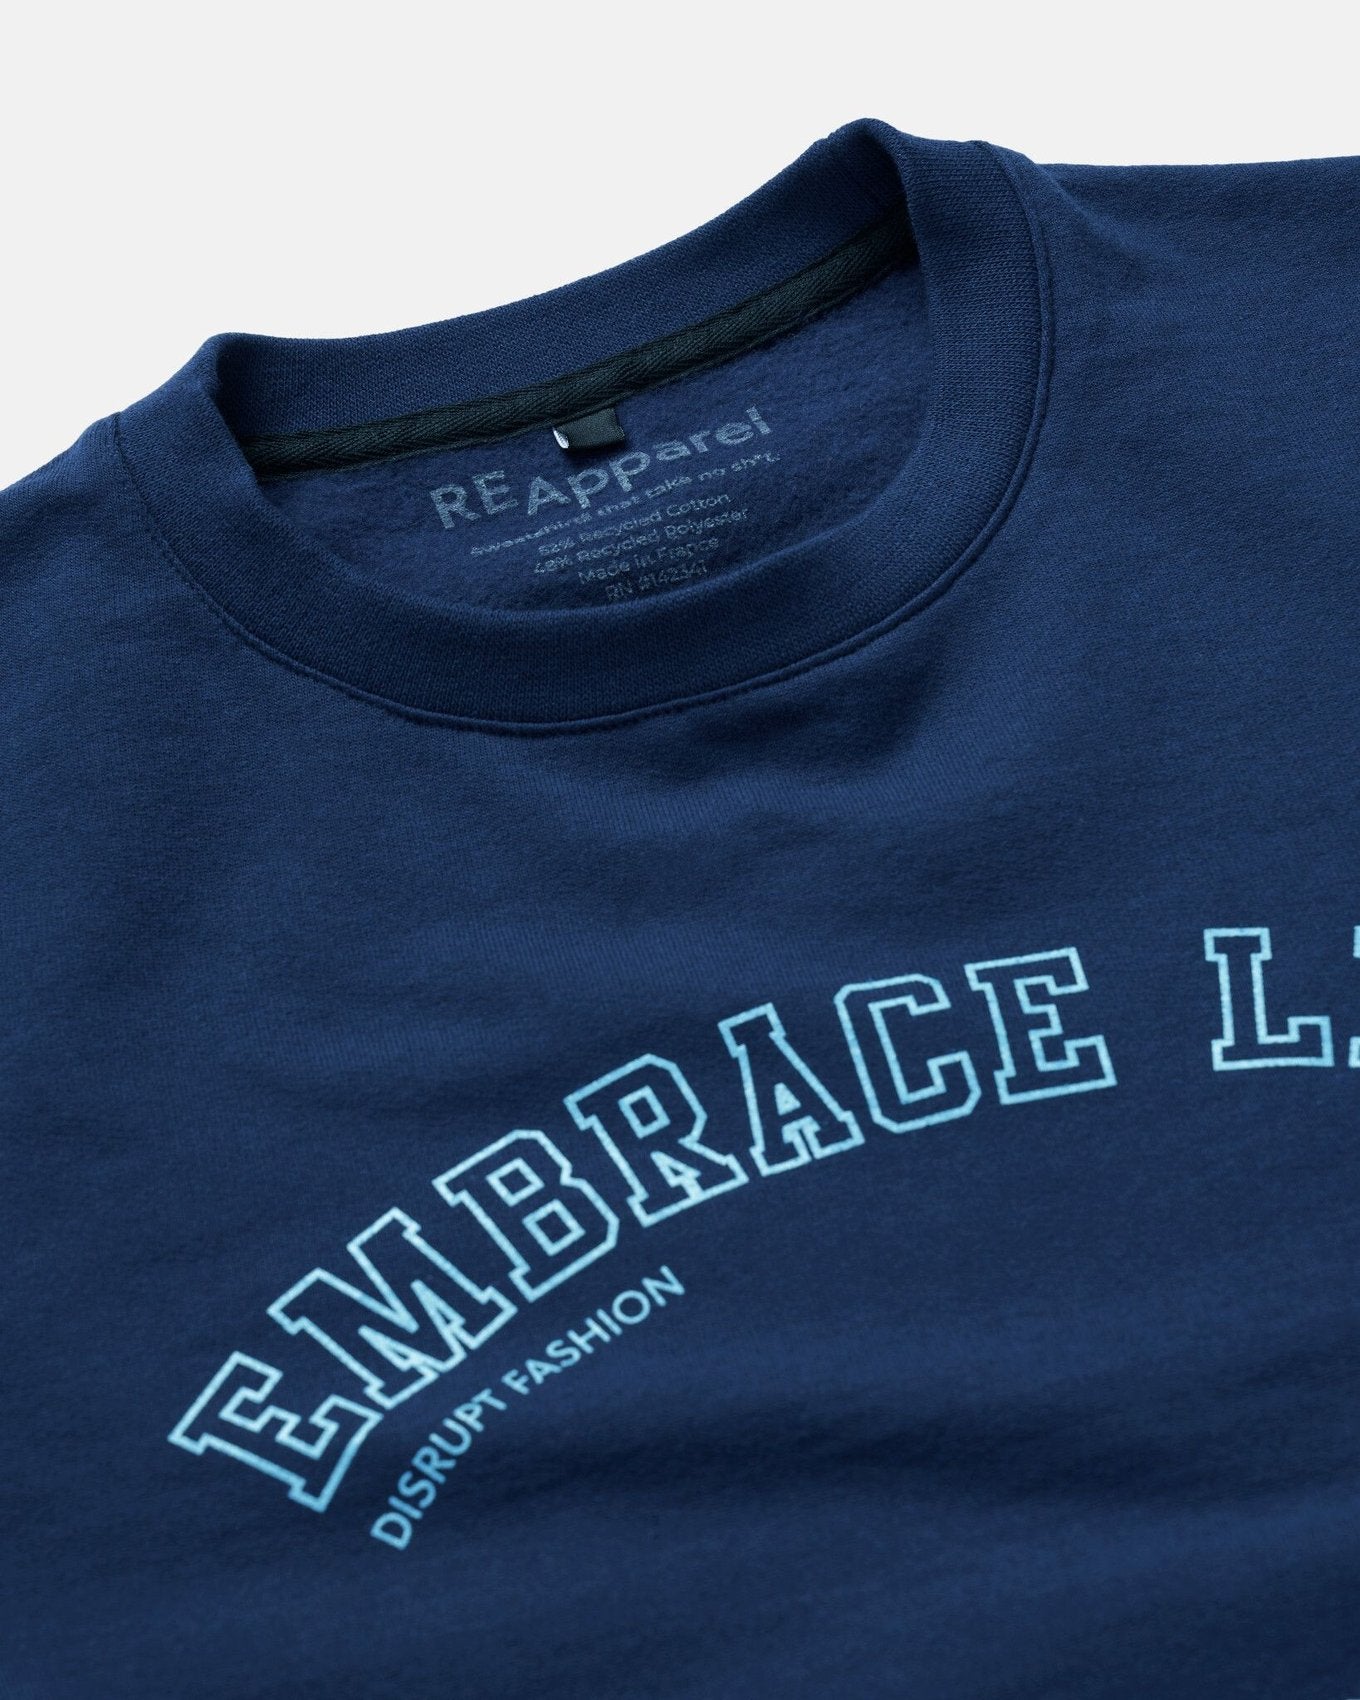 ReApparel Embrace Crew Neck . in color Navy Blue and shape long sleeve